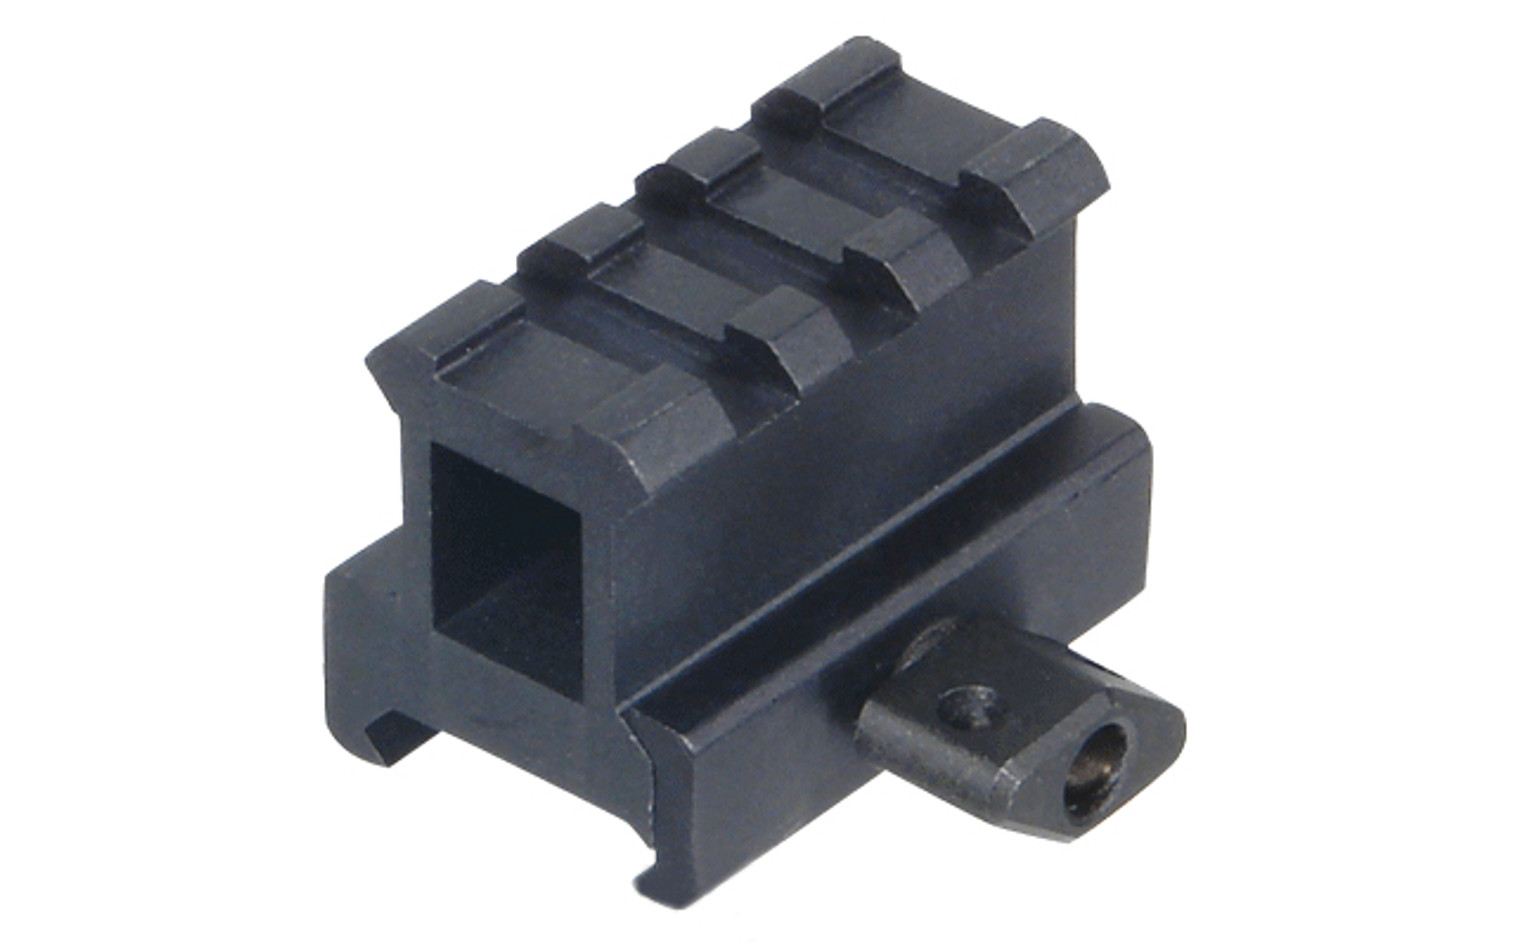 UTG Compact Riser Mount for 20mm Rails (Type: 1" High-Profile)